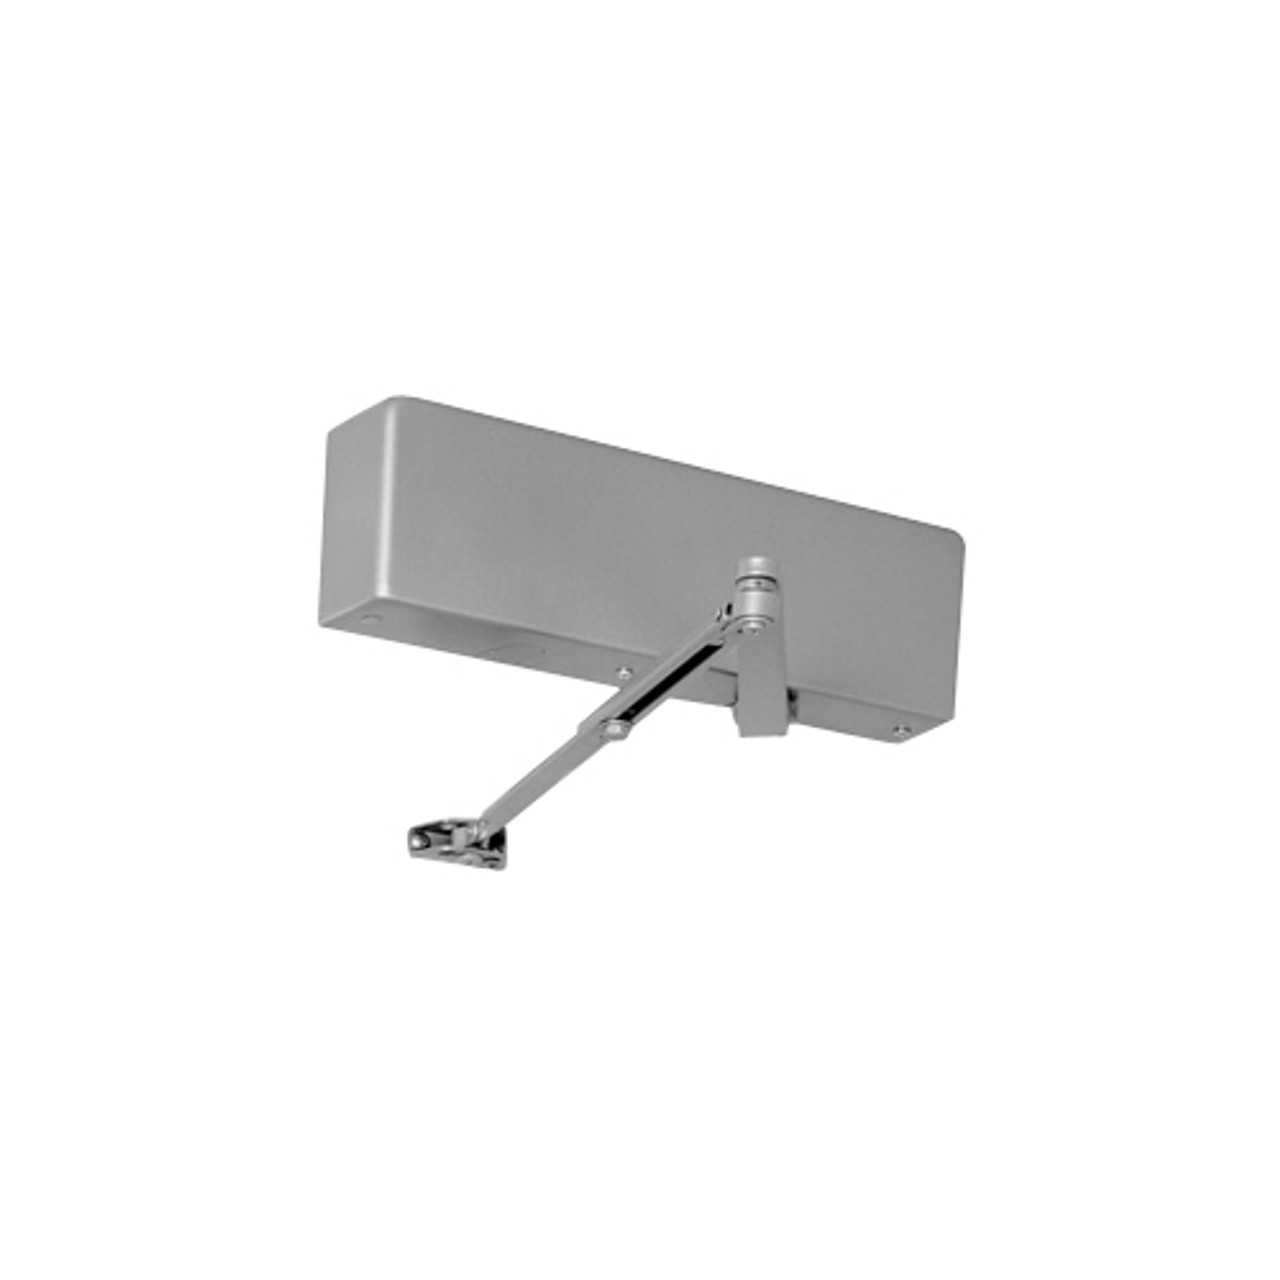 J7530DA-689 Norton 7500 Series Non-Hold Open Institutional Door Closer with Top Jamb Only Reveals 0 to 3 inch in Aluminum Finish